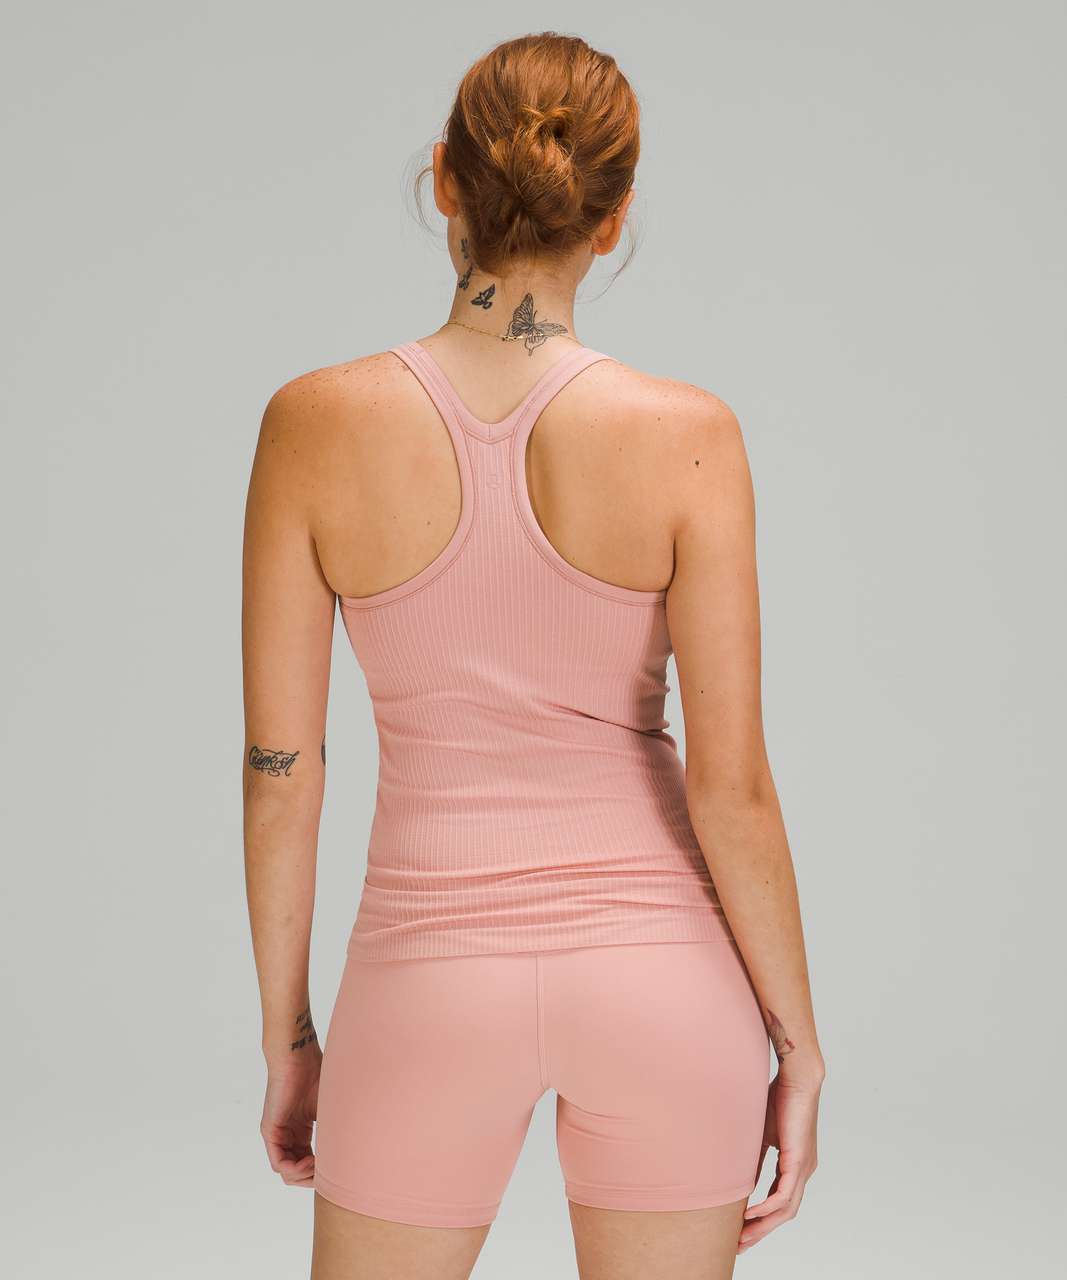 Lululemon Ebb To Street Tank *Light Support For B/C Cup - Pink Puff